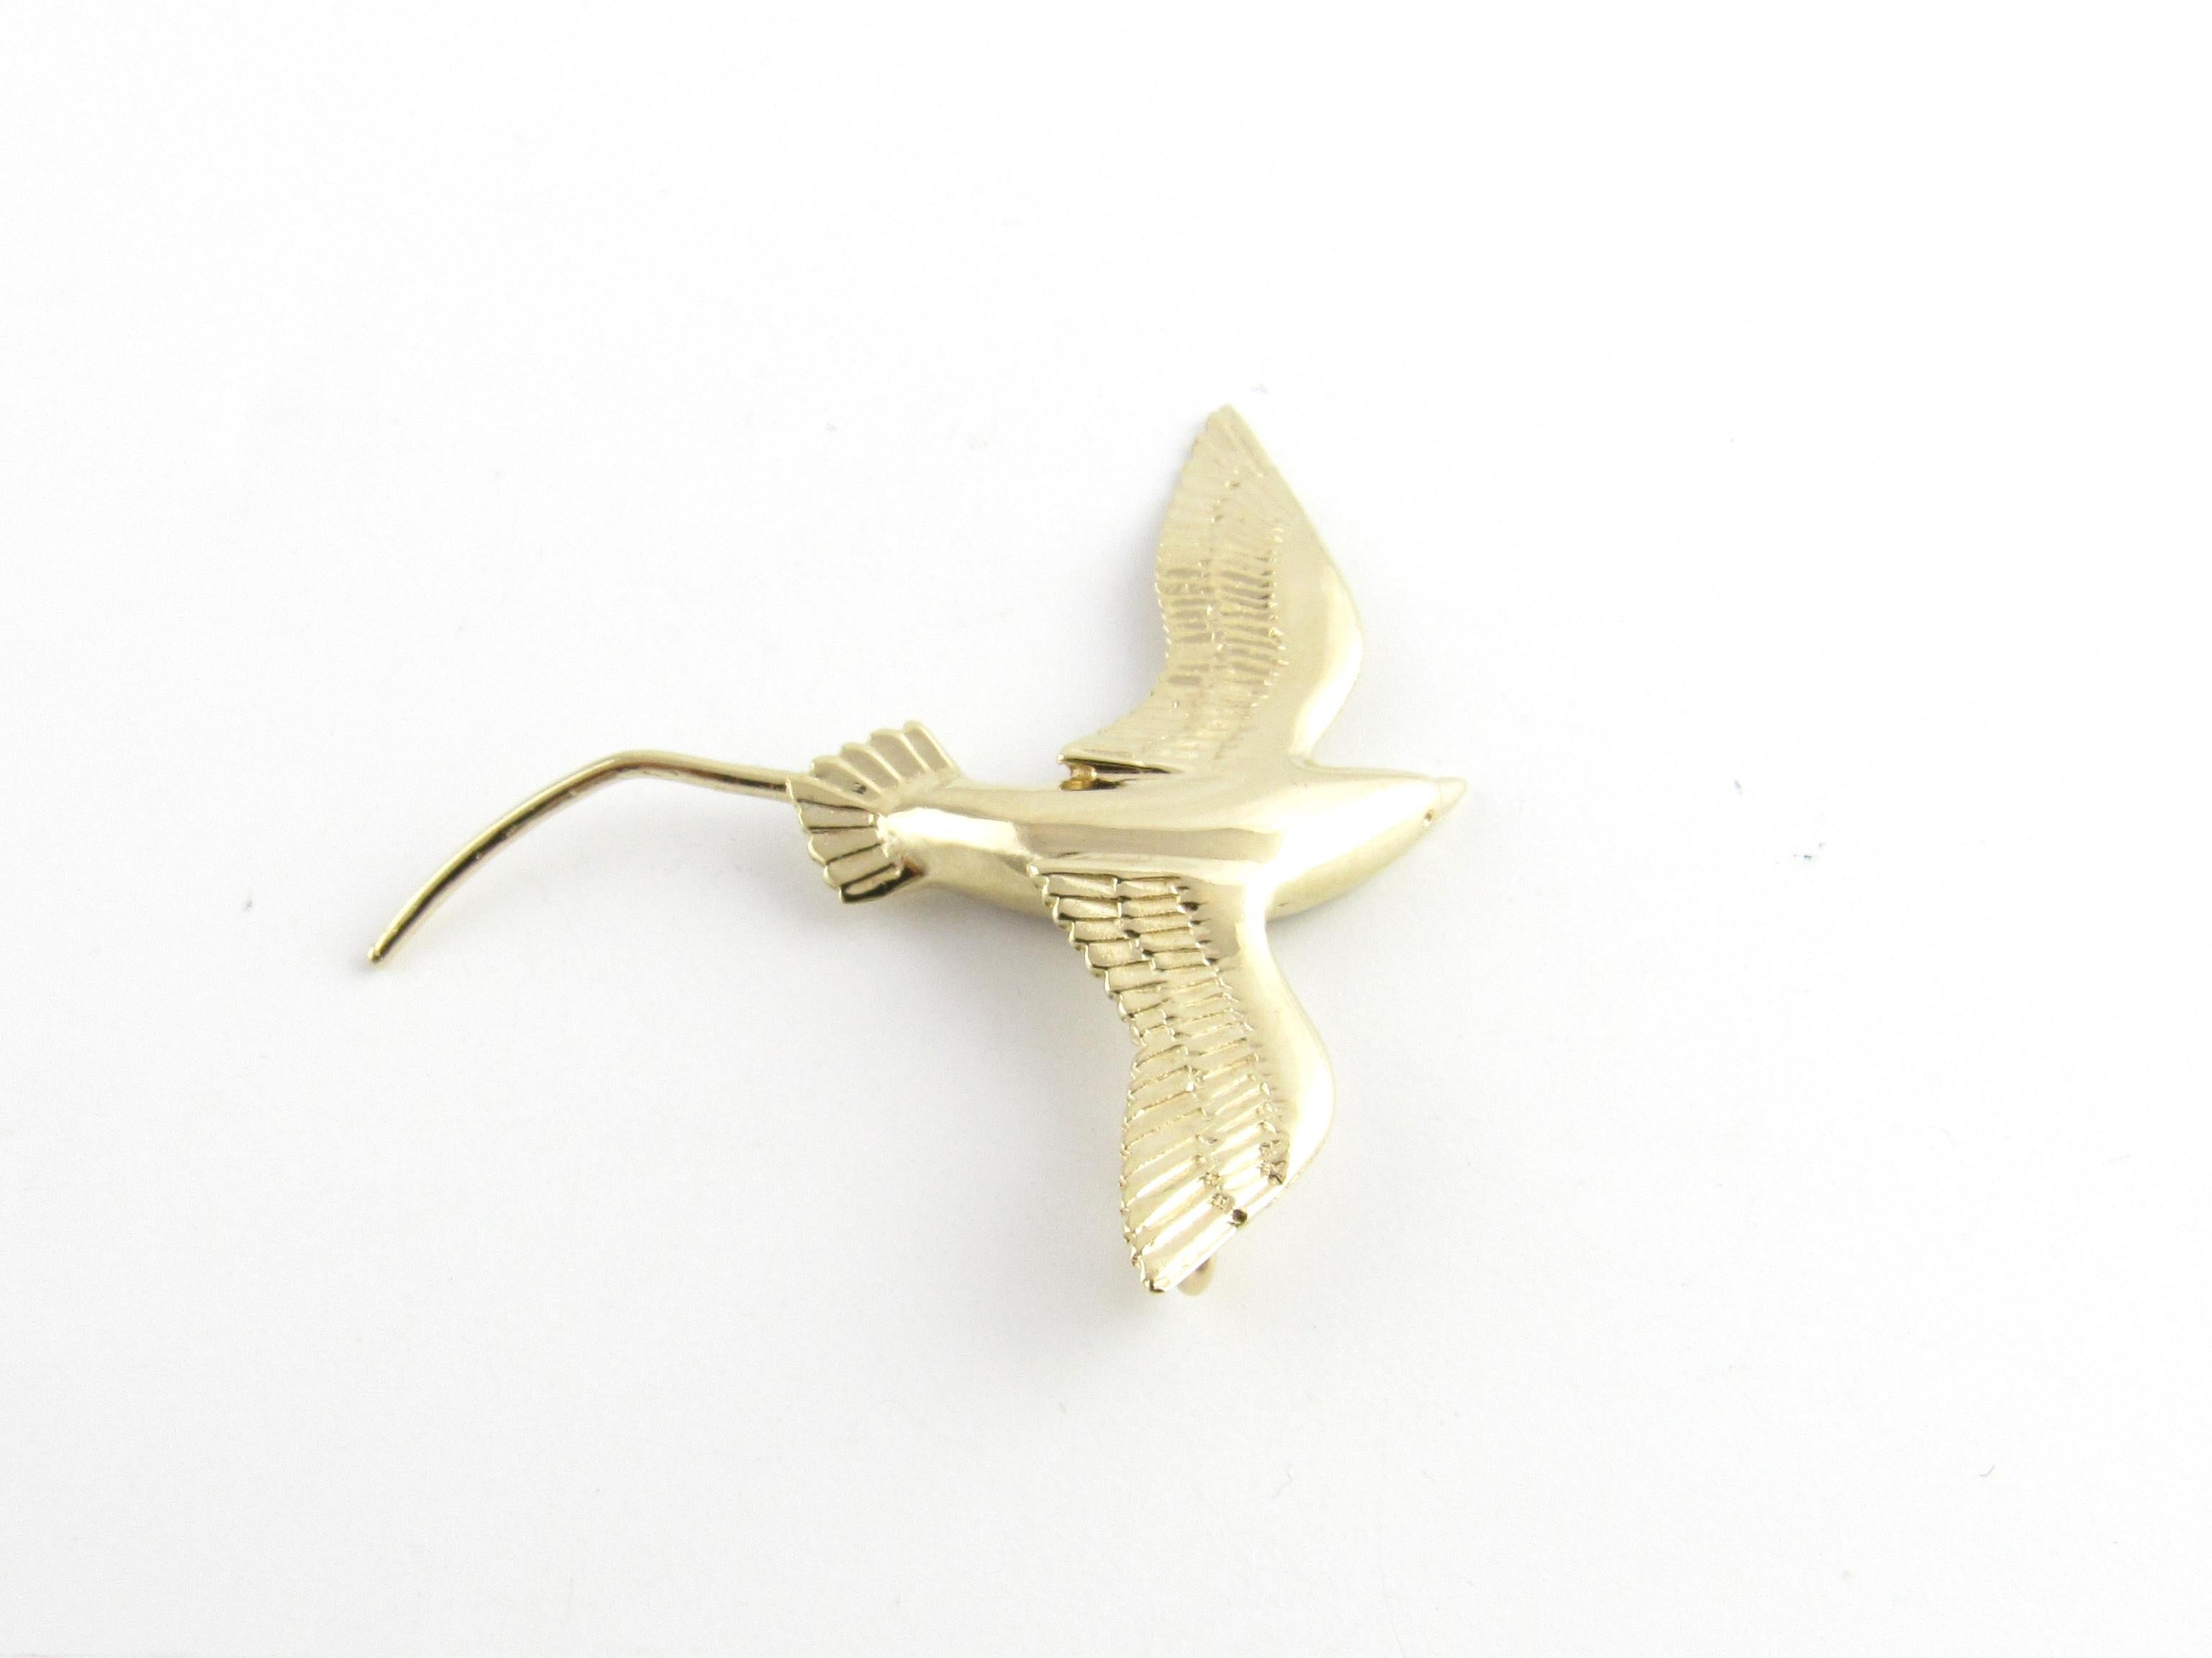 Vintage 14 Karat Yellow Gold Bird Pendant

Poetry in motion!

This lovely pendant features a bird in flight crafted in meticulously detailed 14K yellow gold.

Size: 41 mm x 38 mm

Weight: 3.2 dwt. / 5.1 gr.

Stamped: 14K

Very good condition,